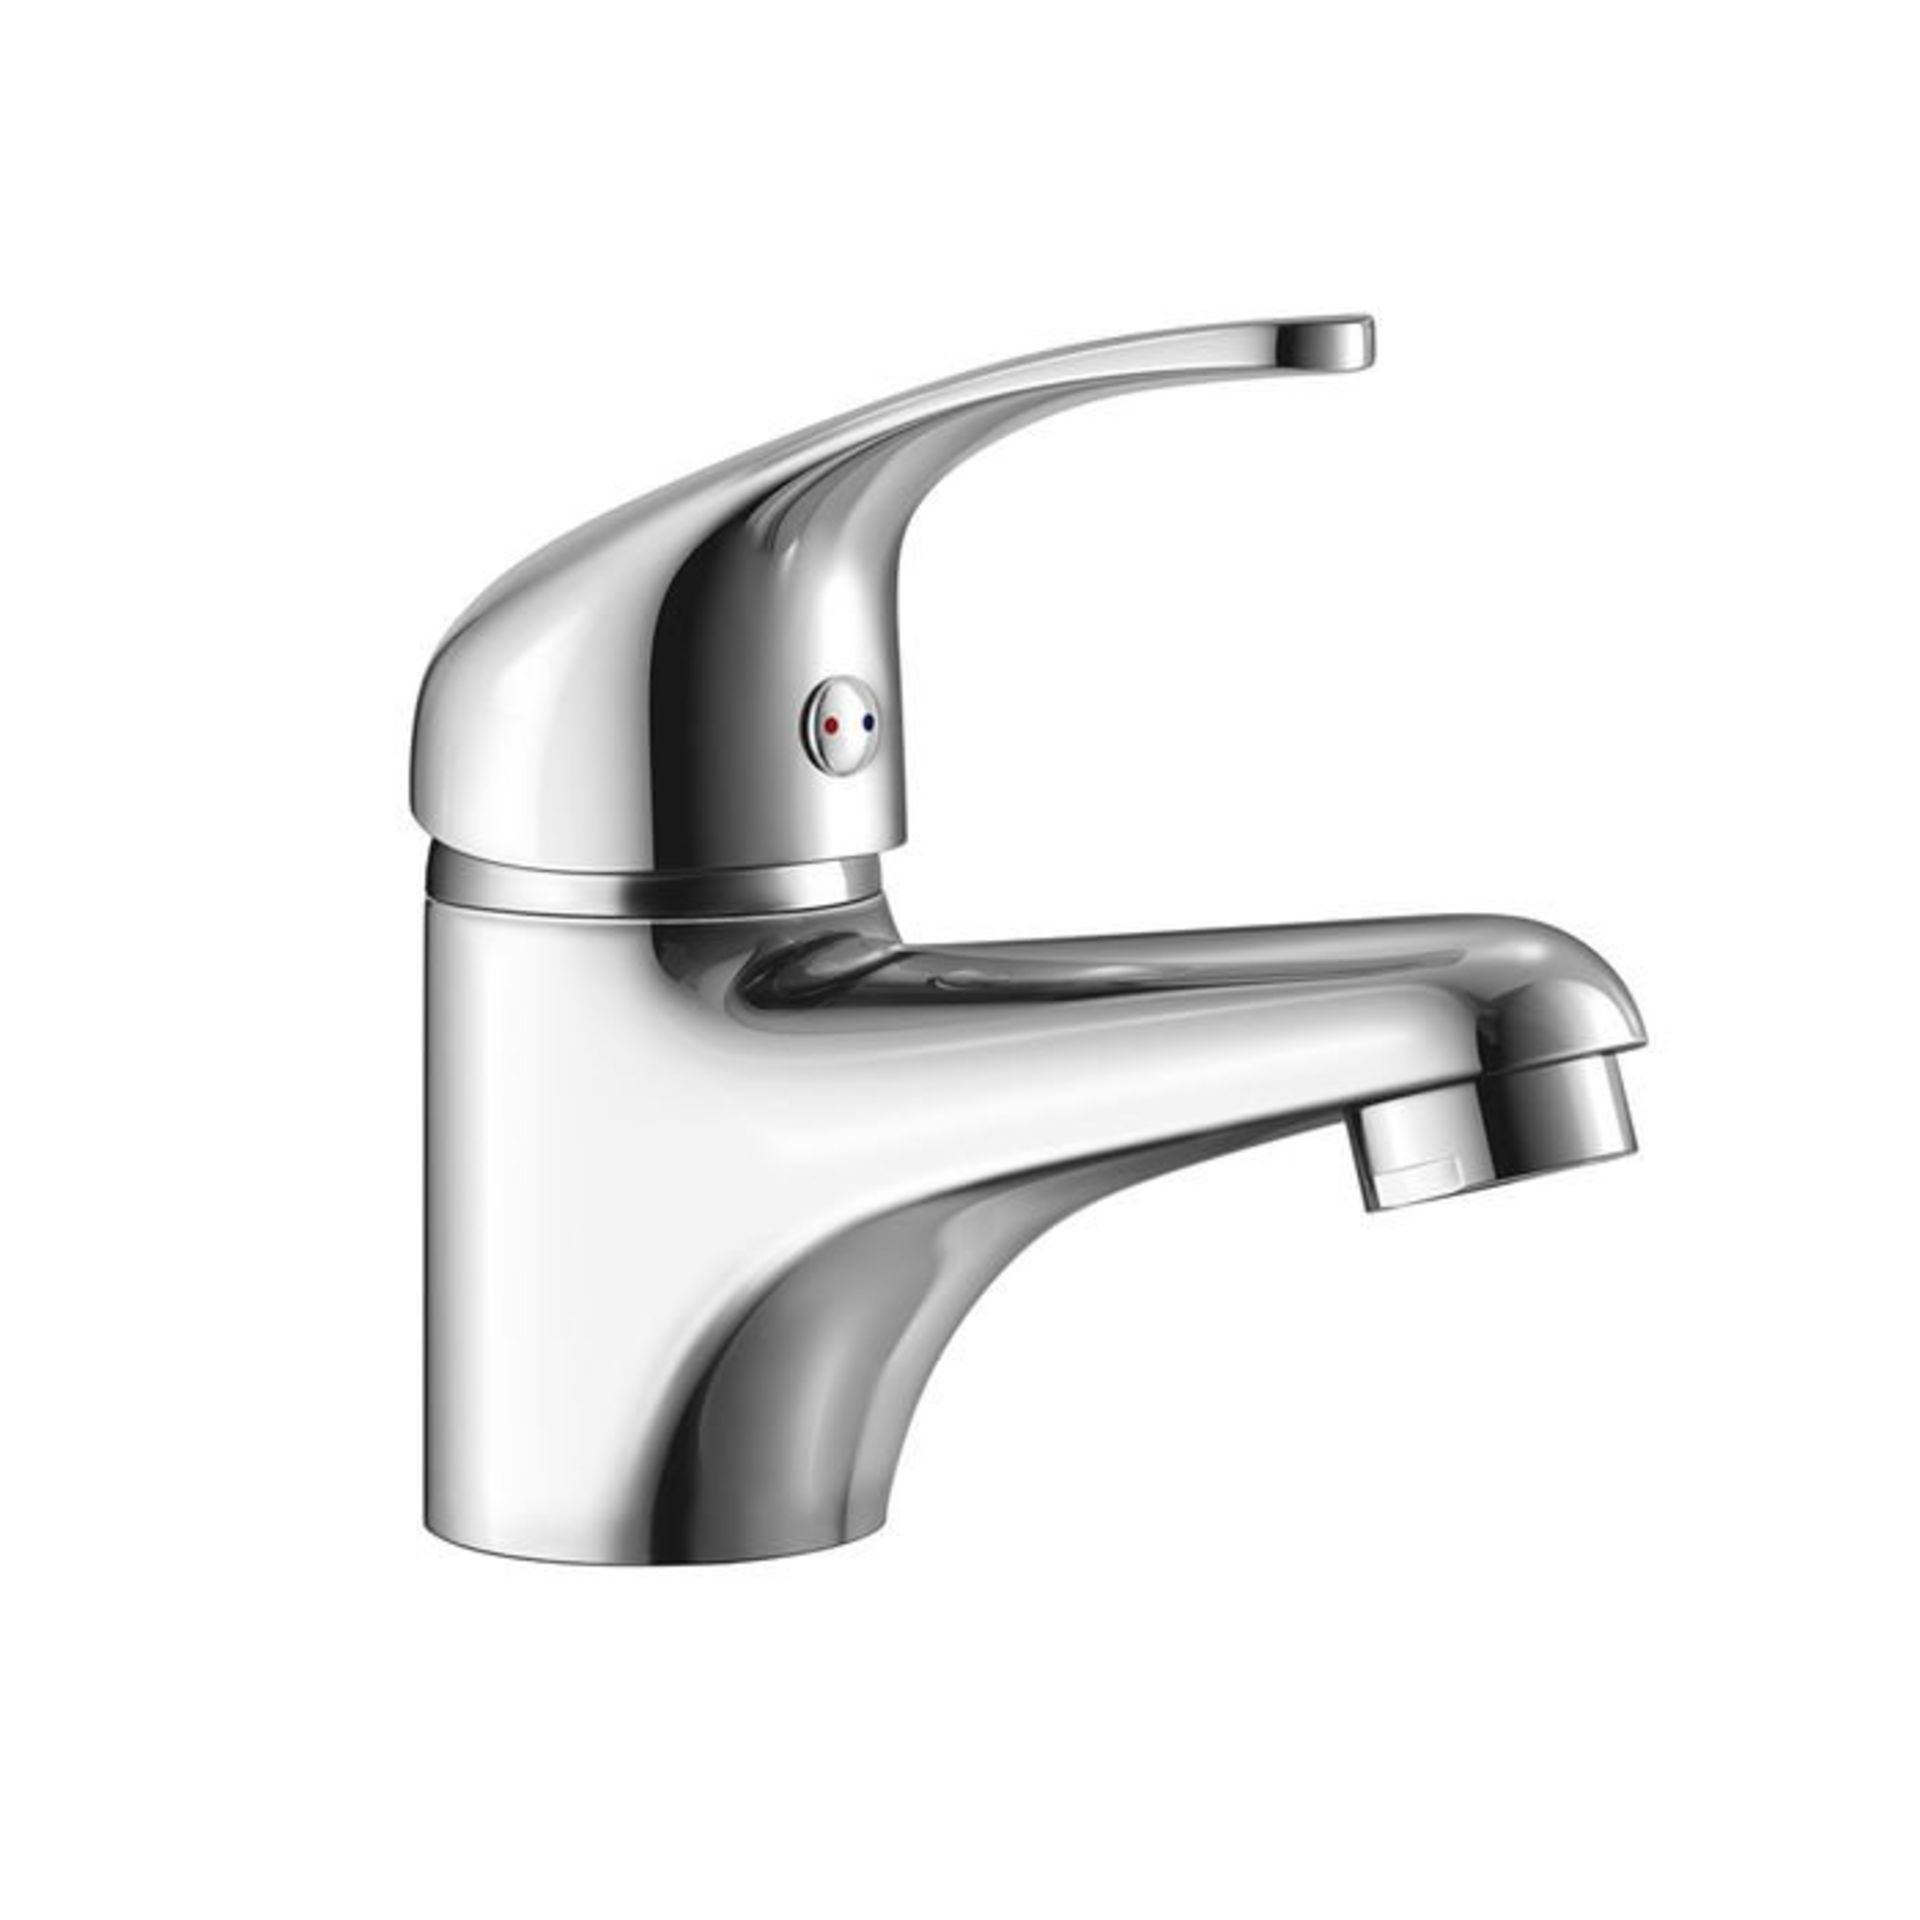 (S27) Sleek Chrome Modern Bathroom Basin Sink Lever Mixer Tap. Engineered from premium solid brass - Image 3 of 3